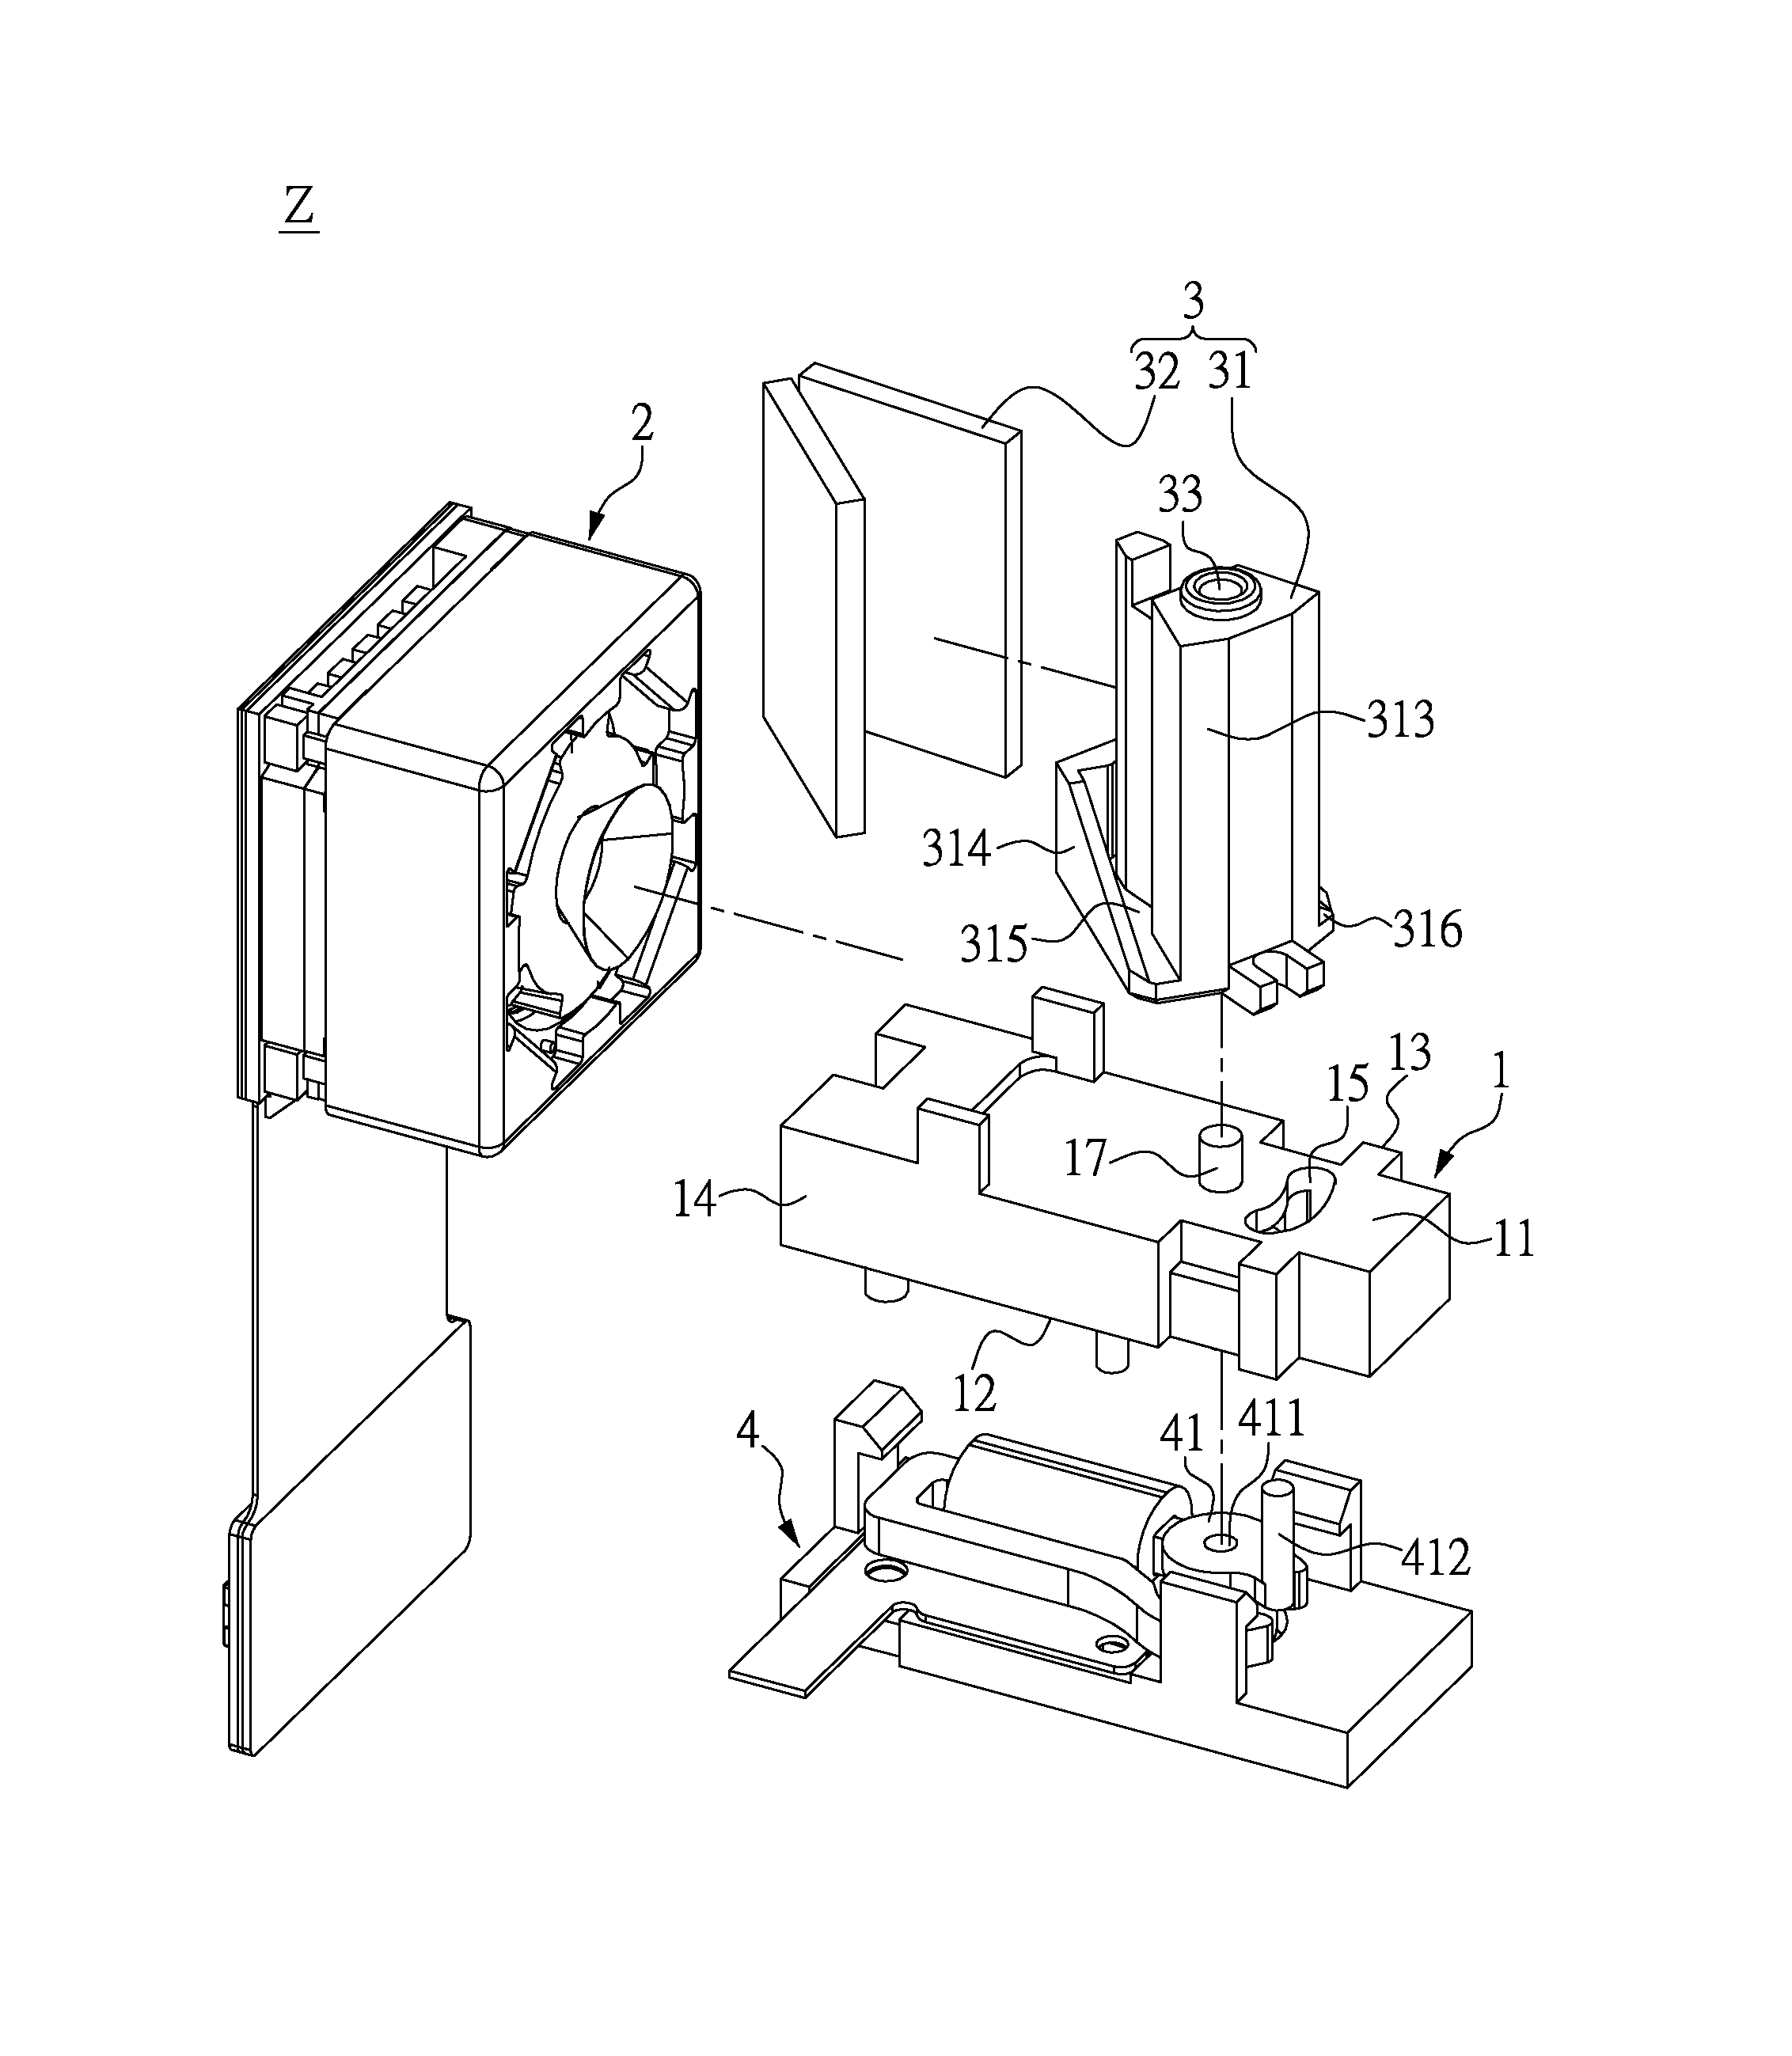 Camera angle adjustable device and the method of handling the article